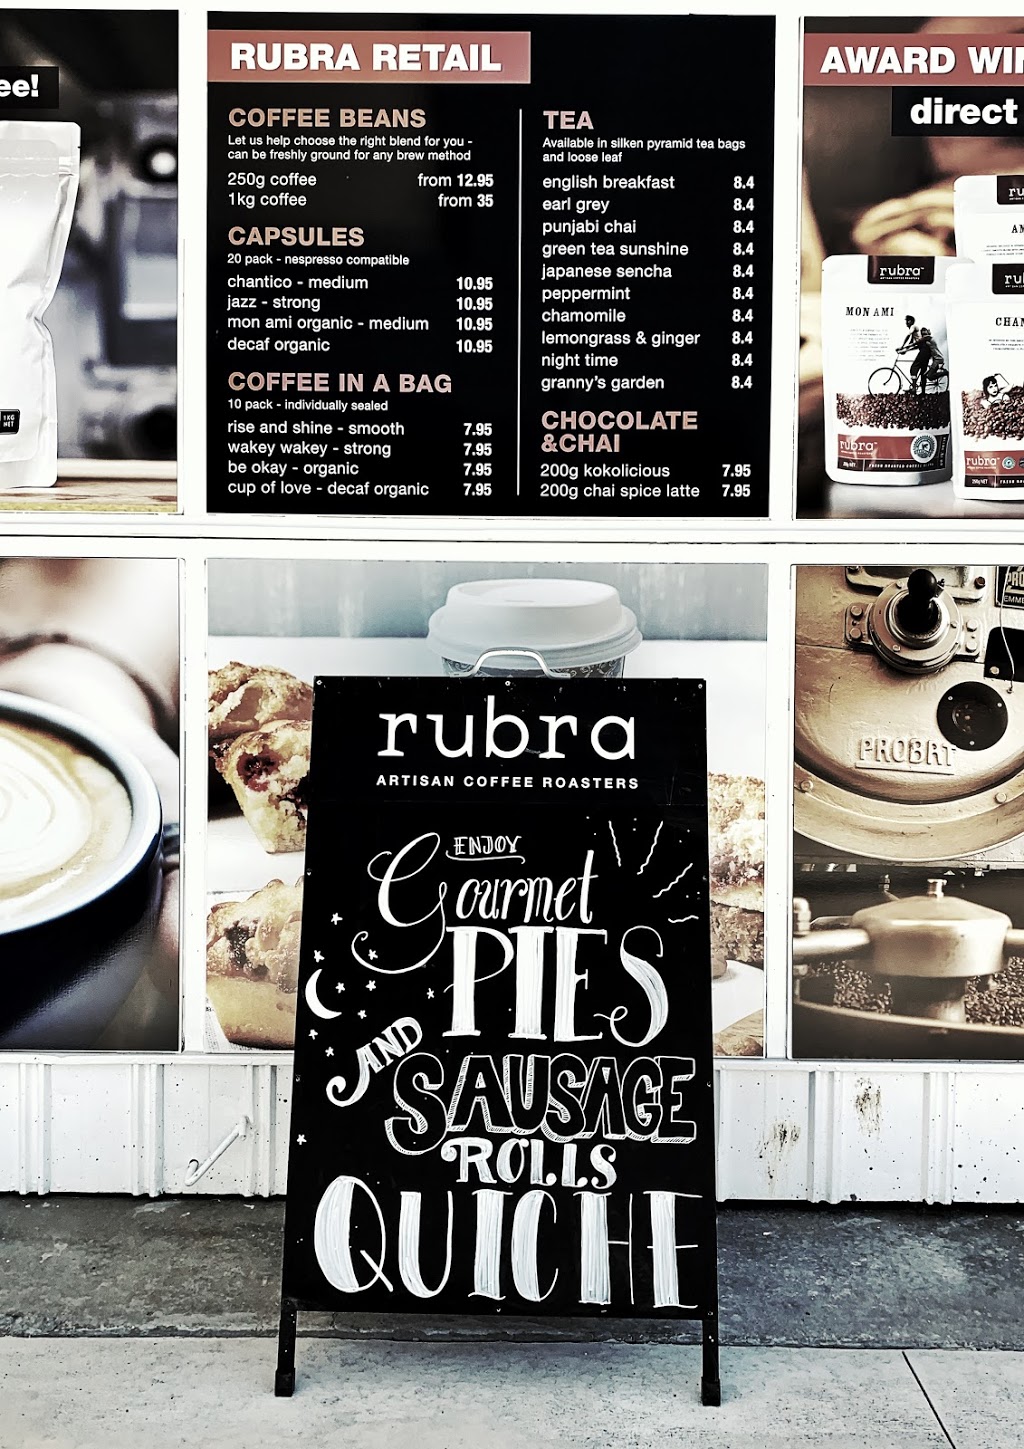 Rubra on the Go Middle Swan | 53 Great Northern Hwy, Middle Swan WA 6056, Australia | Phone: (08) 9314 6299